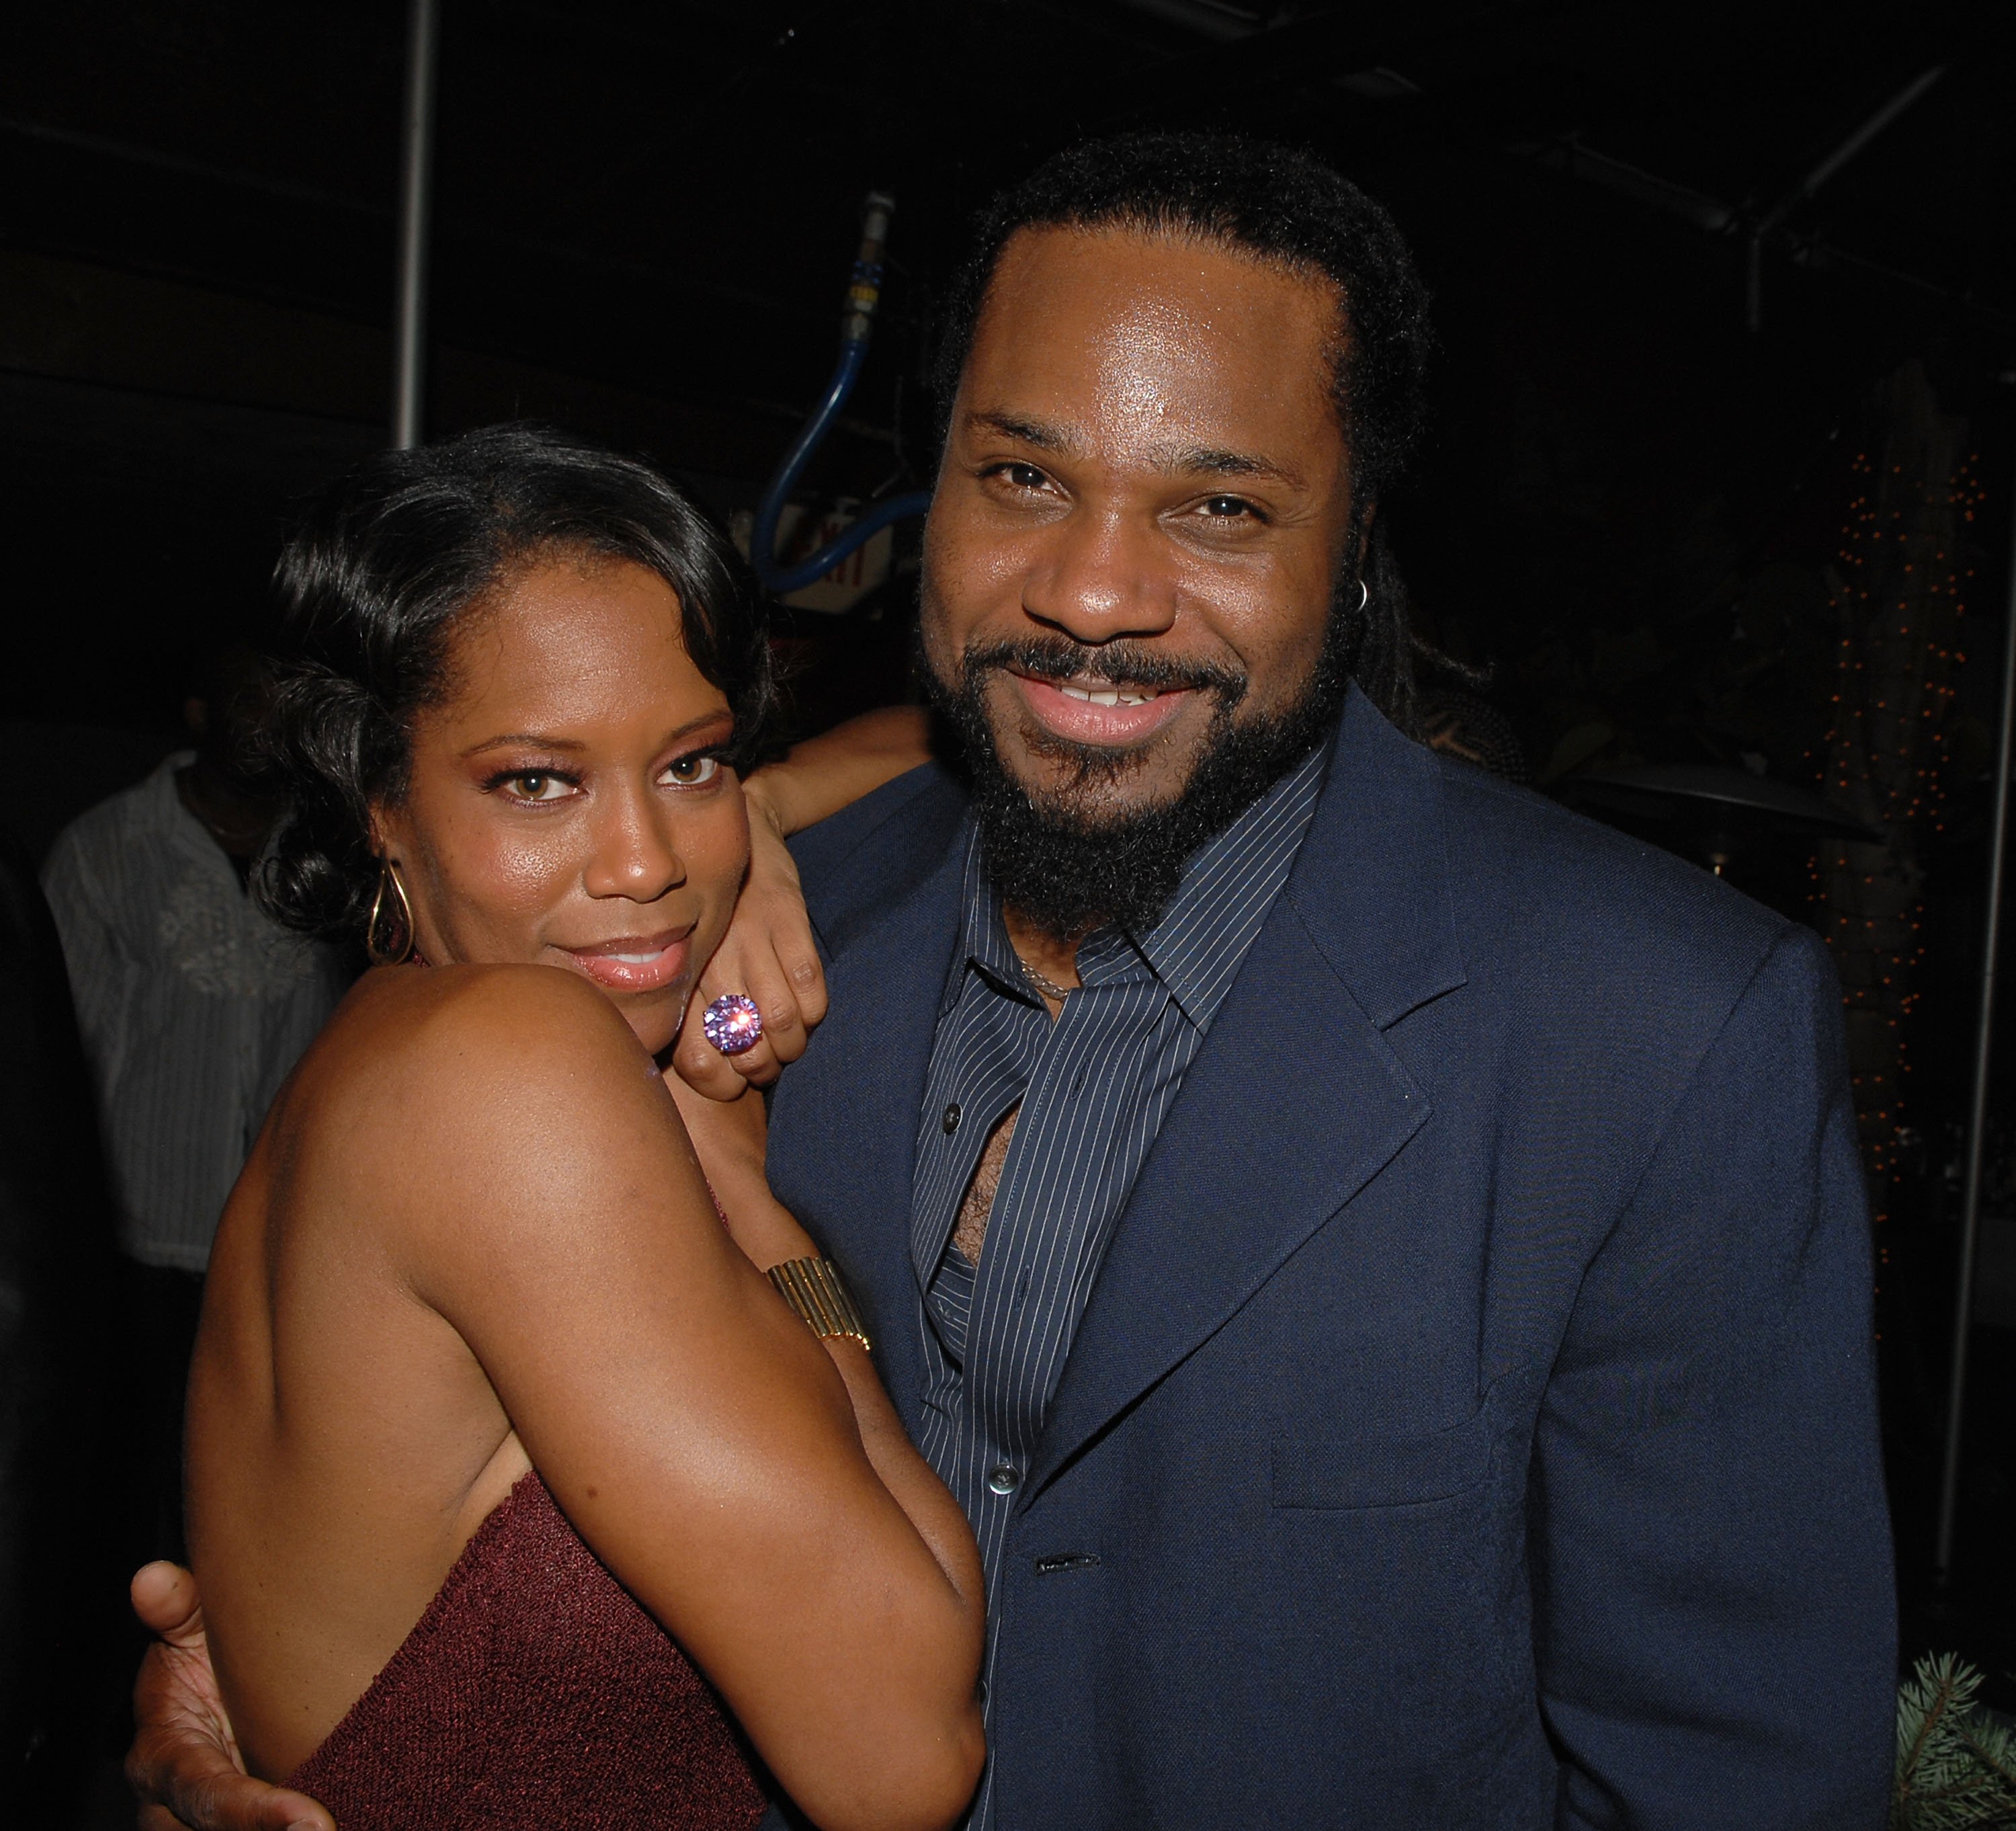 Regina King and Malcolm-Jamal Warner at the premiere after party of "This Christmas" on November 12, 2007 | Source: Getty Images